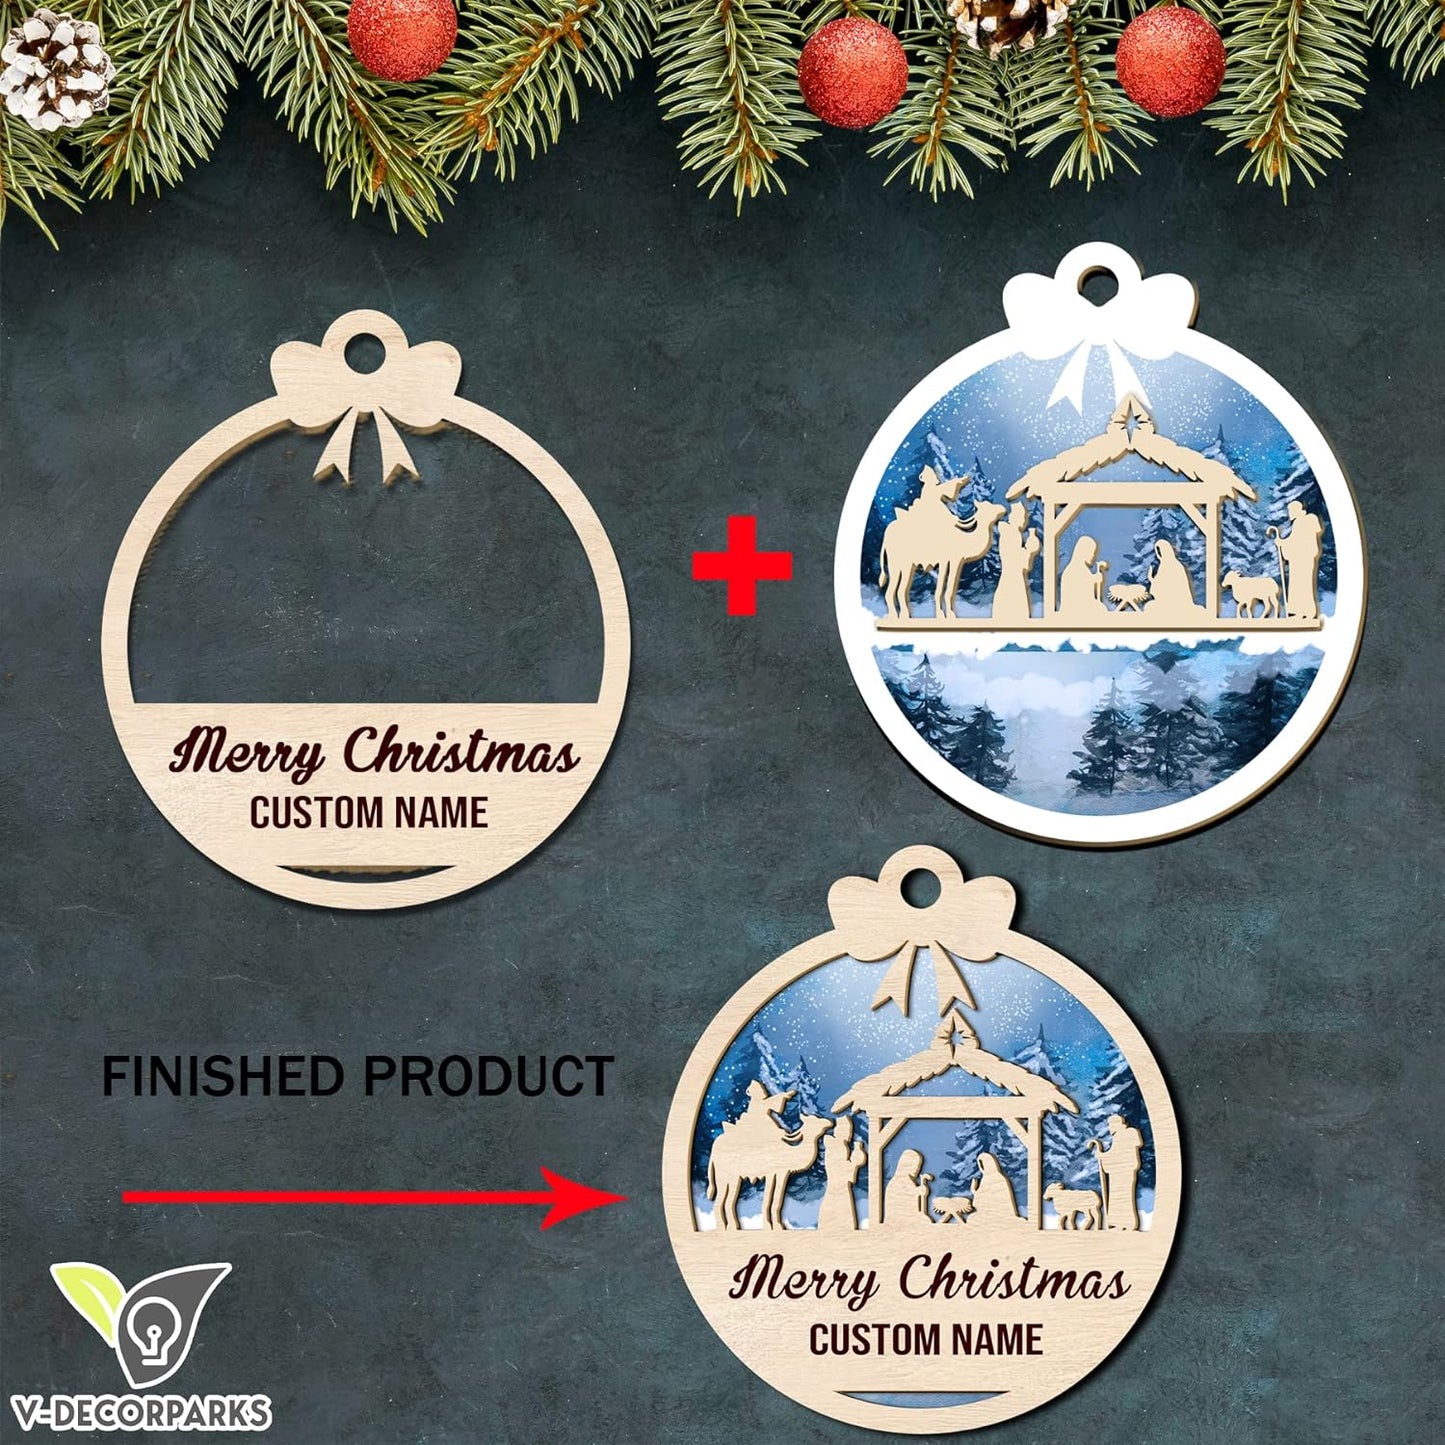 Custom Nativity Merry Christmas Family Wood Layered Ornaments - Personalized Ornaments for Christmas Tree Decorations